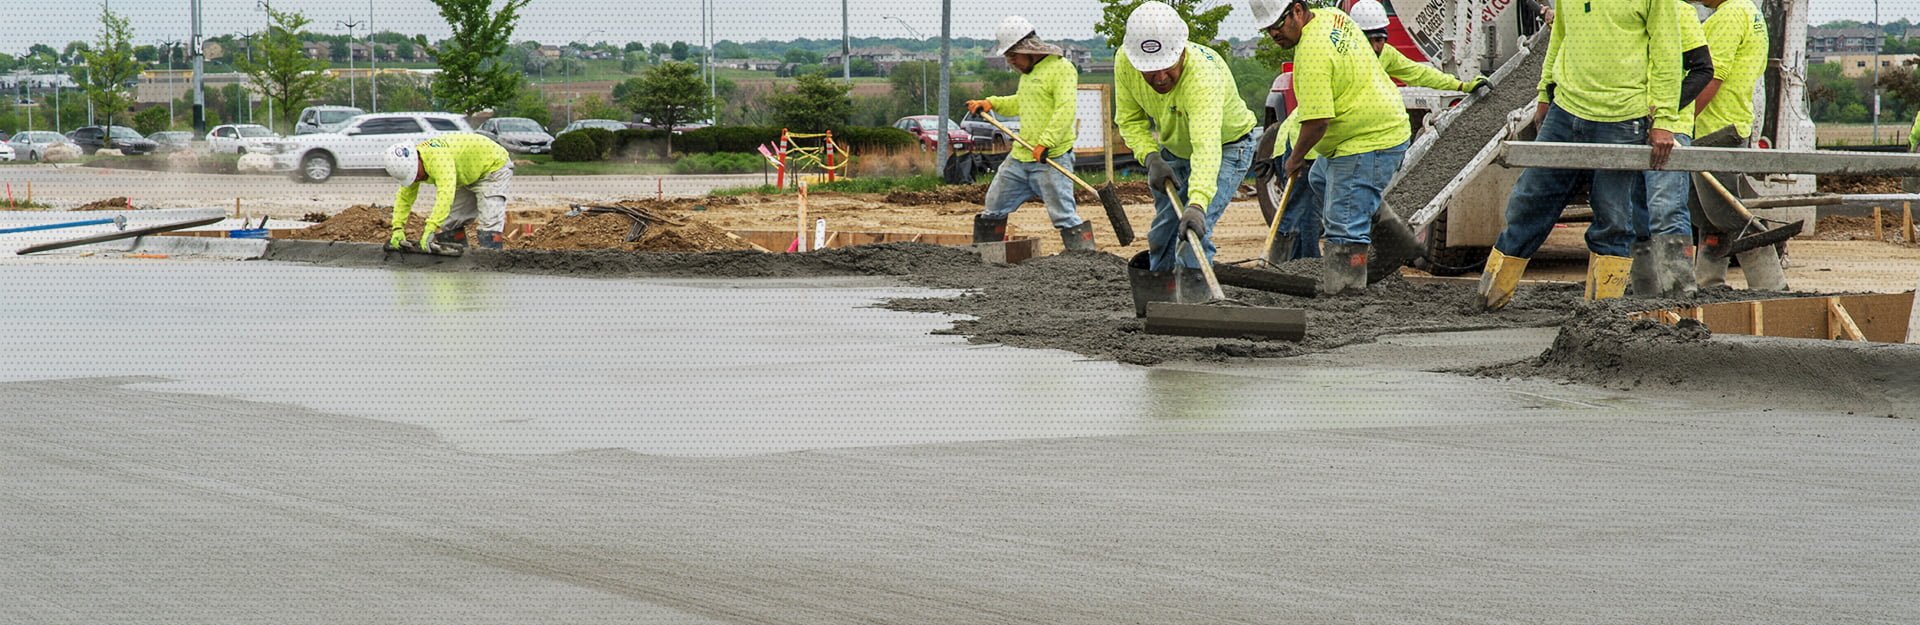 The AM Contracting team preparing concrete that has been freshly laid down as they smooth it out against the wooden barrier and create curbs when necessary.